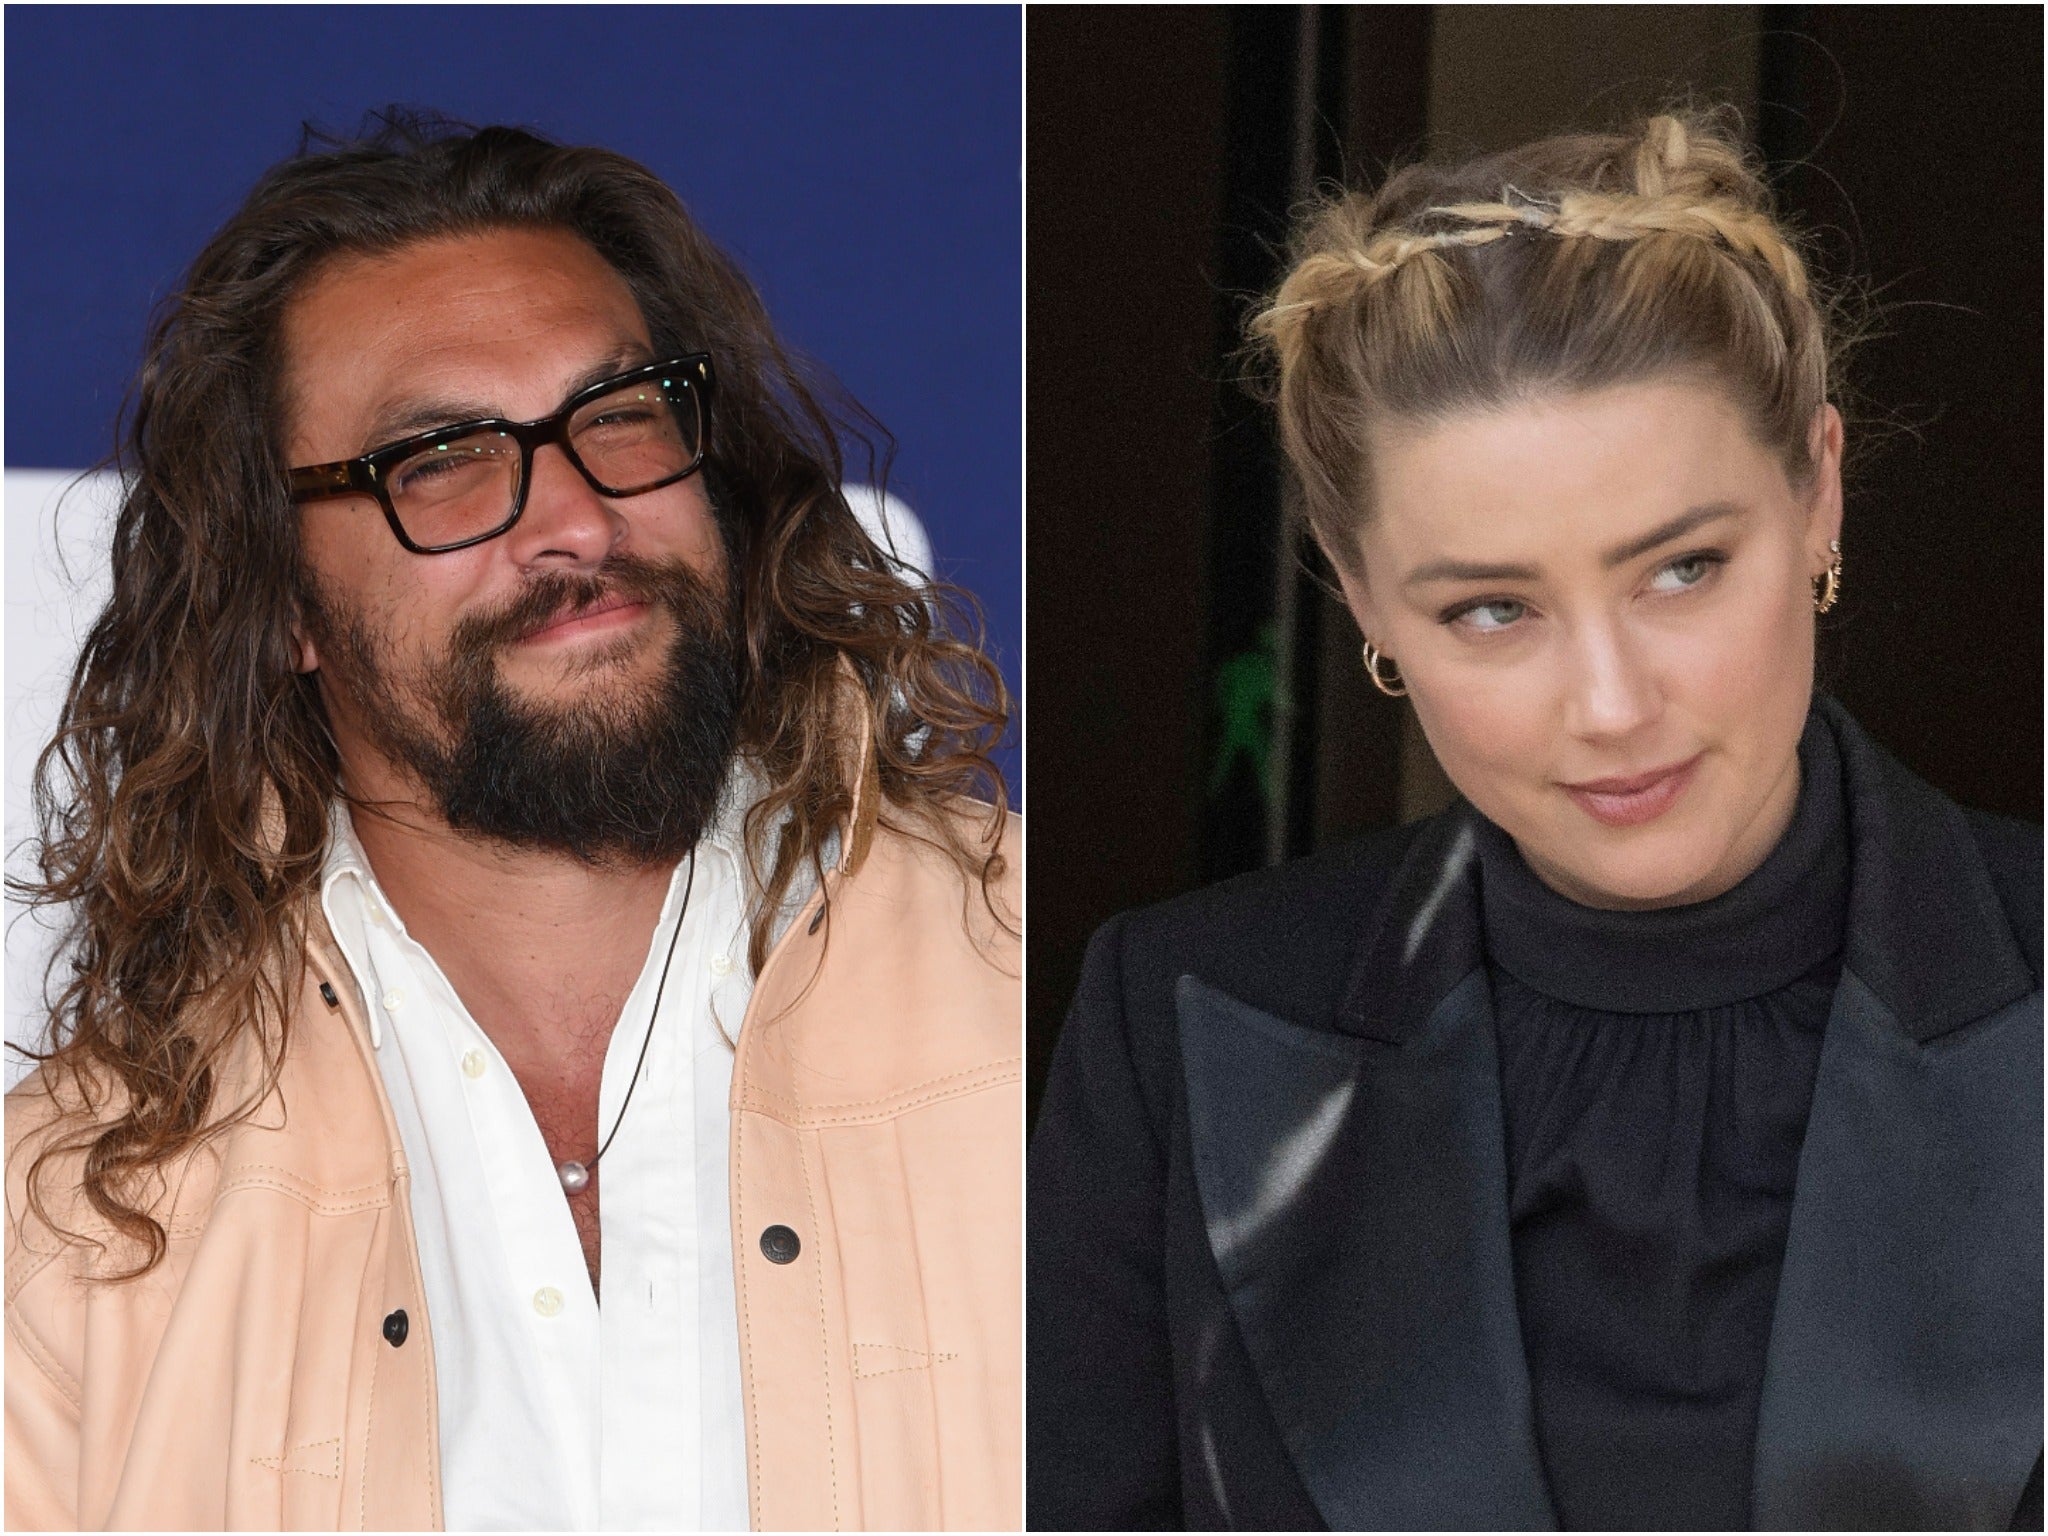 Jason Momoa shares photos from The Last Manhunt set as Aquaman 2 co-star Amber Heards trial continues The Independent